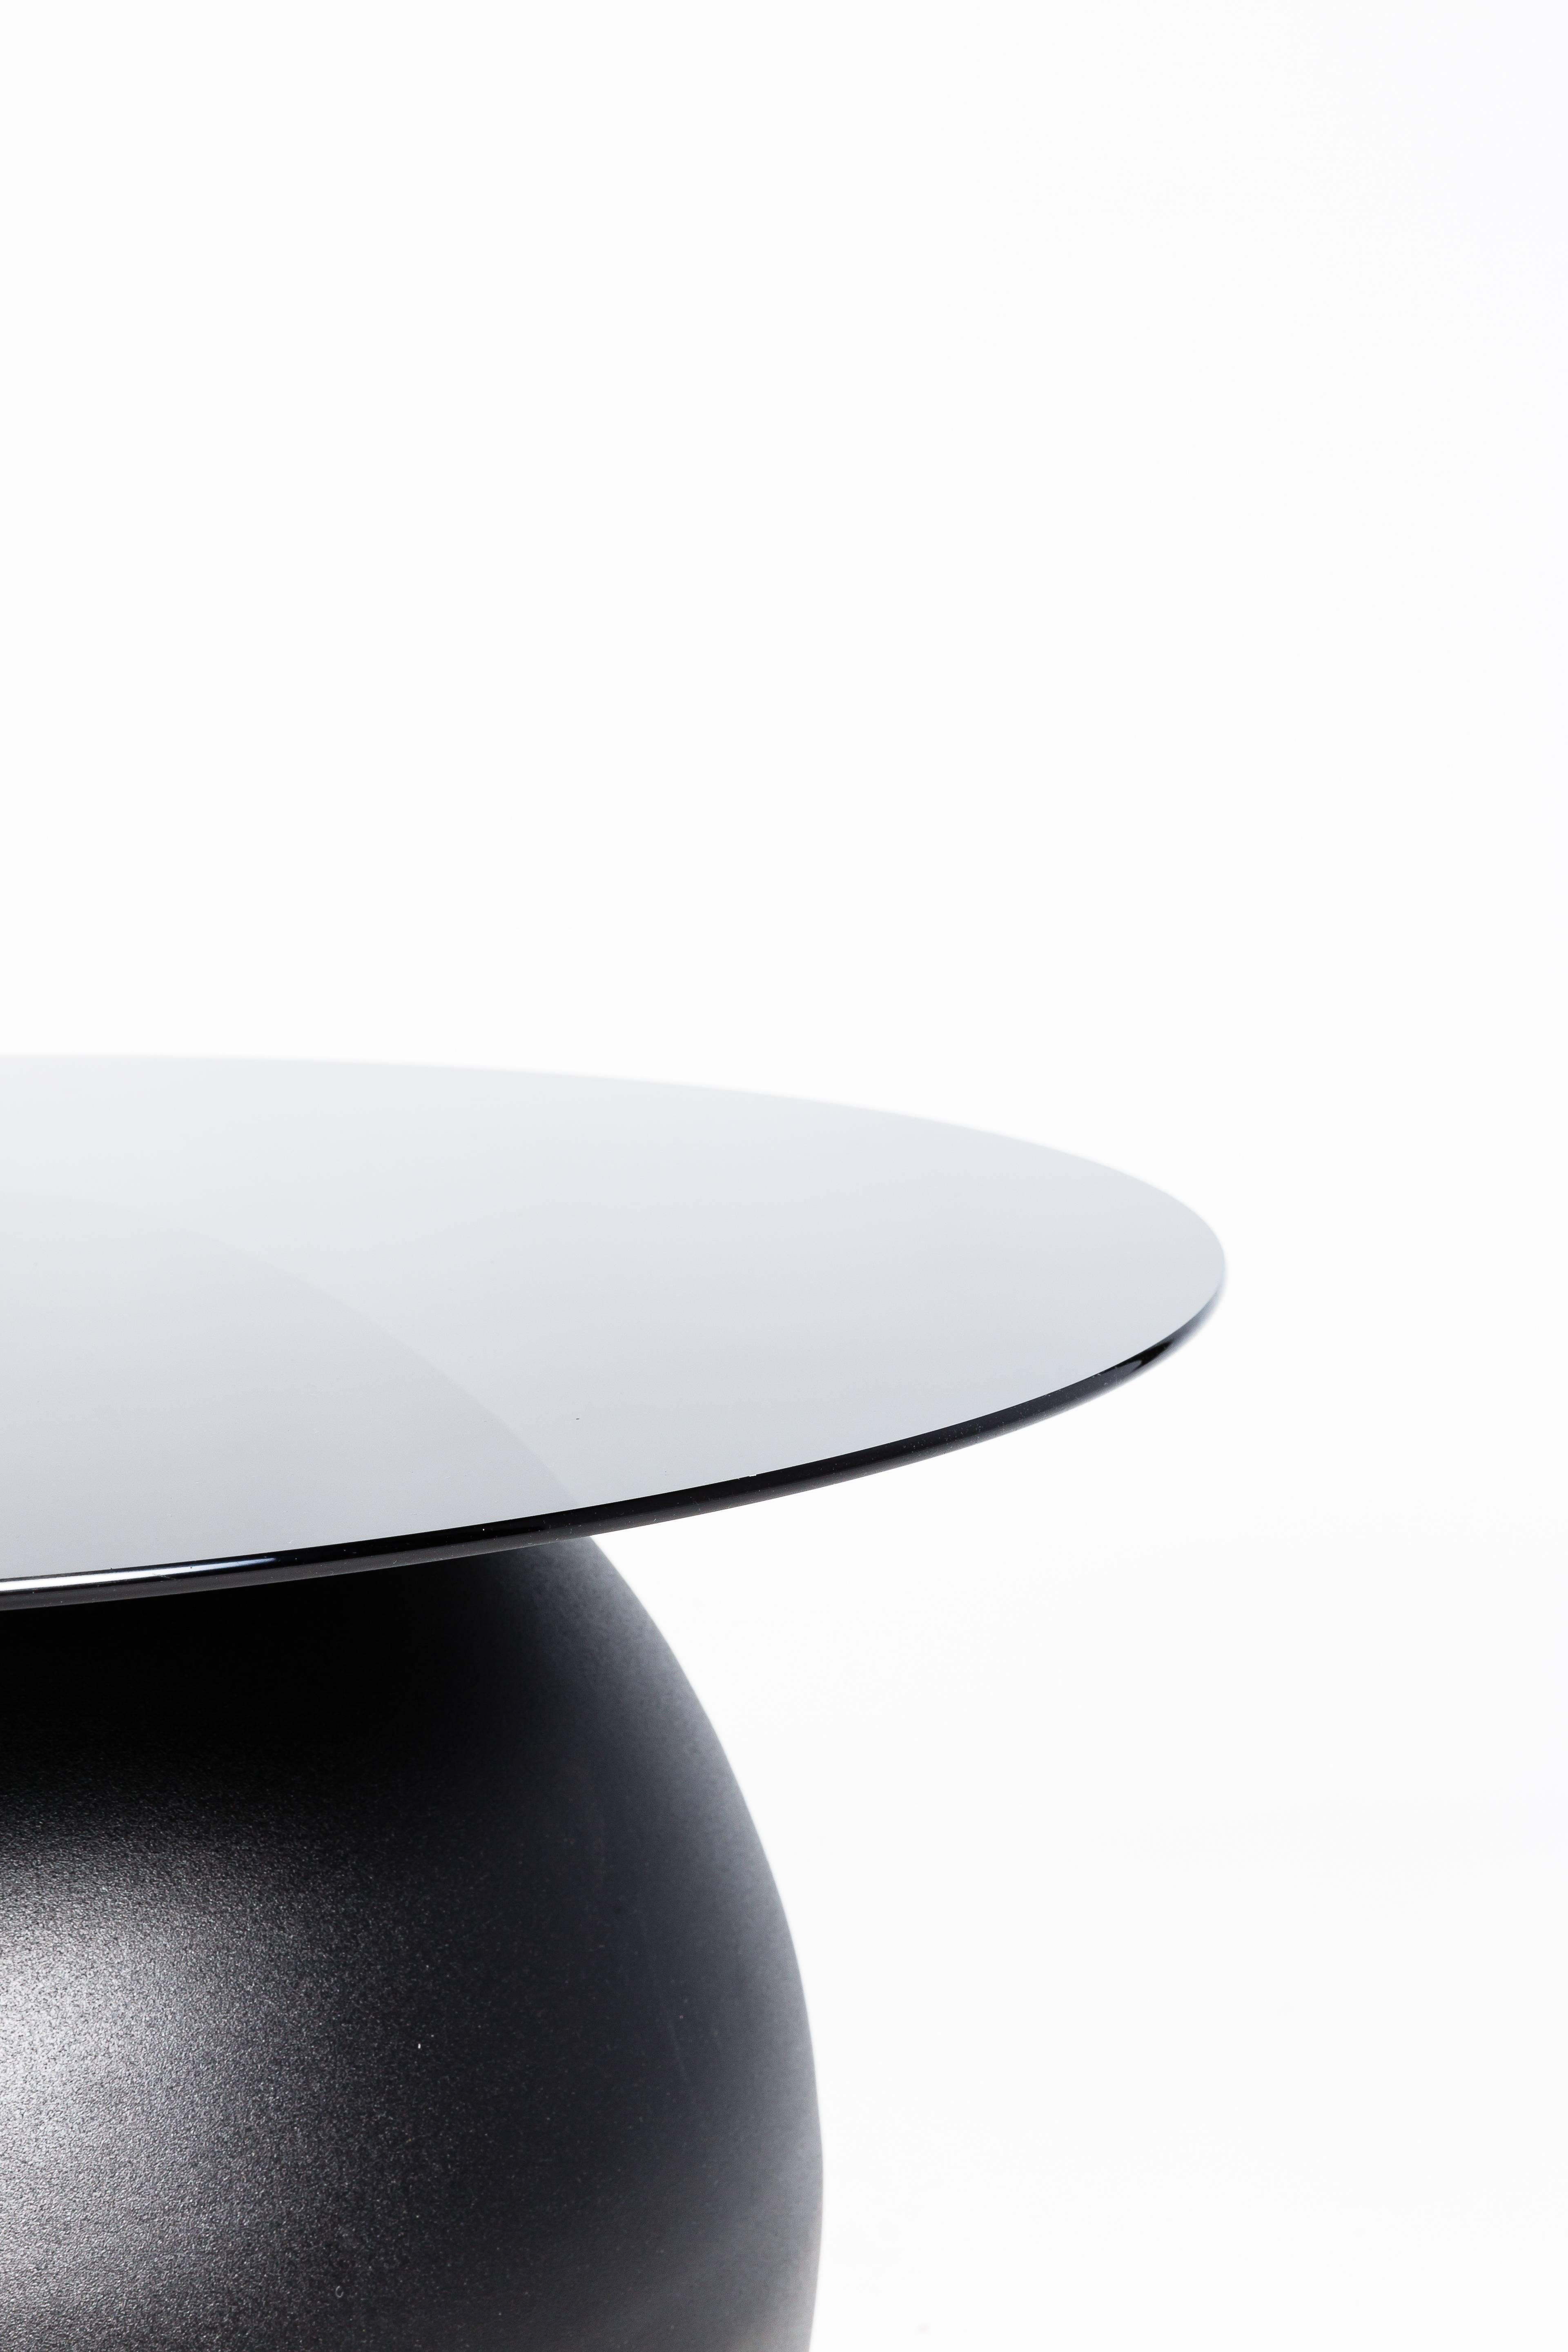 Canadian Pluto Table, Matte Black with Black Glass For Sale